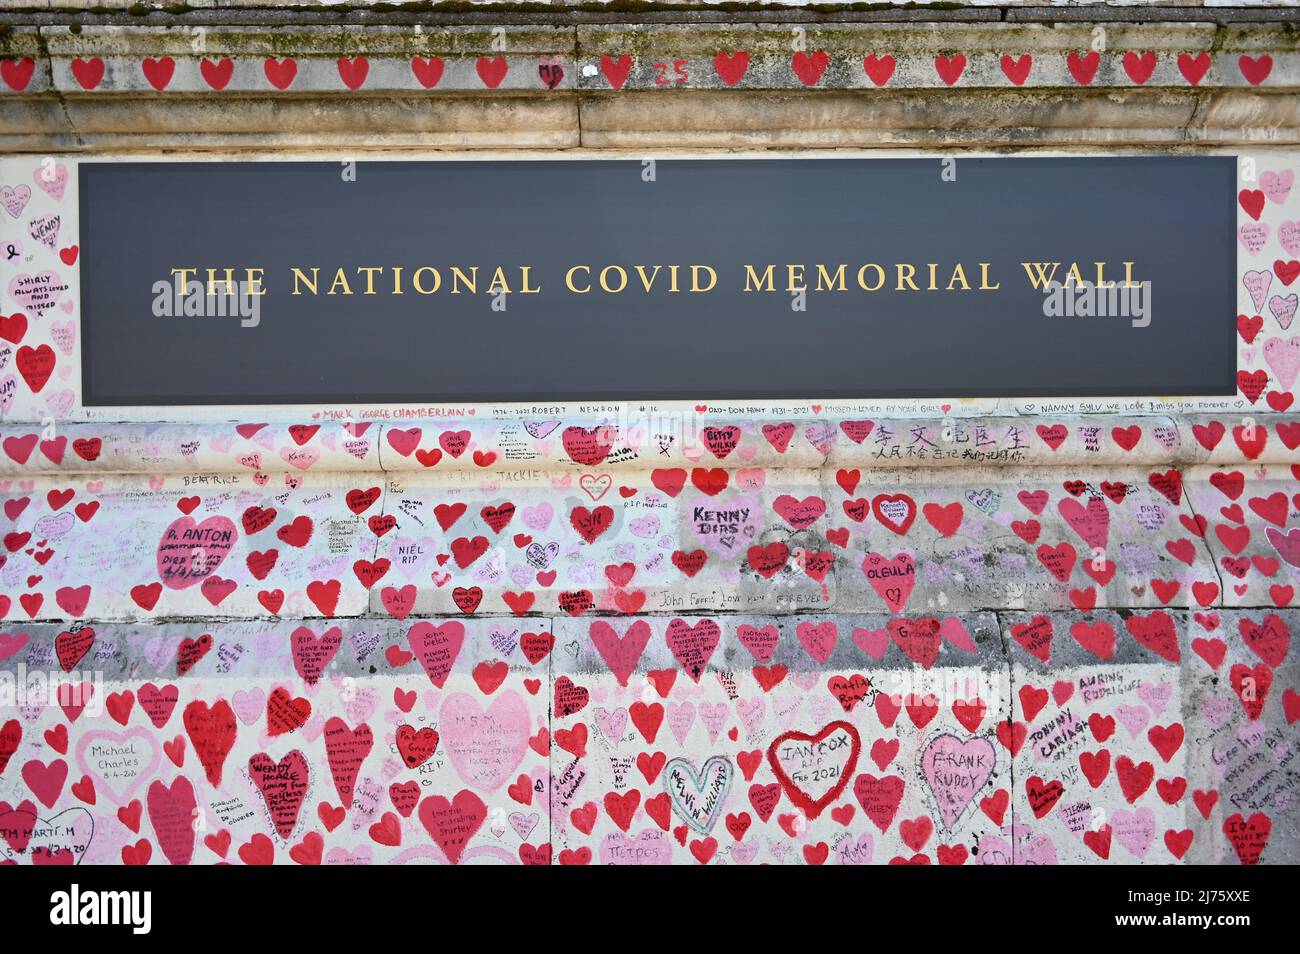 London, UK. It was announced today that Sweden suffered fewer deaths in the Pandemic despite refusing to impose strict lockdowns. The UK ranks appoximately midway in the table of EU excess death rates, coming 15th out of 27 member states. Pictured the National COVID Memorial Wall in Westminster. Credit: michael melia/Alamy Live News Stock Photo